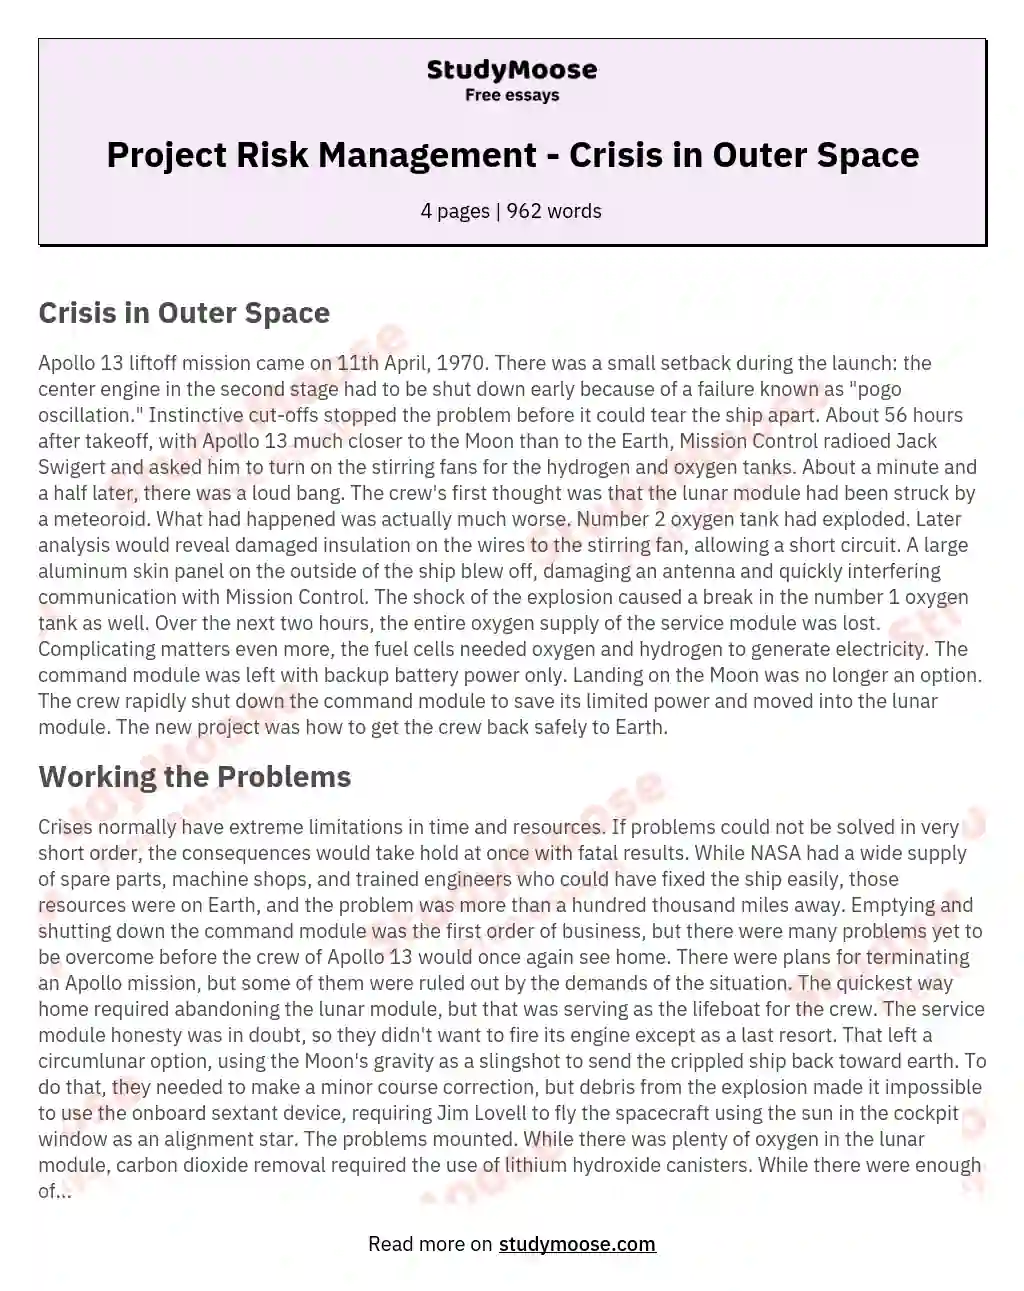 Project Risk Management - Crisis in Outer Space